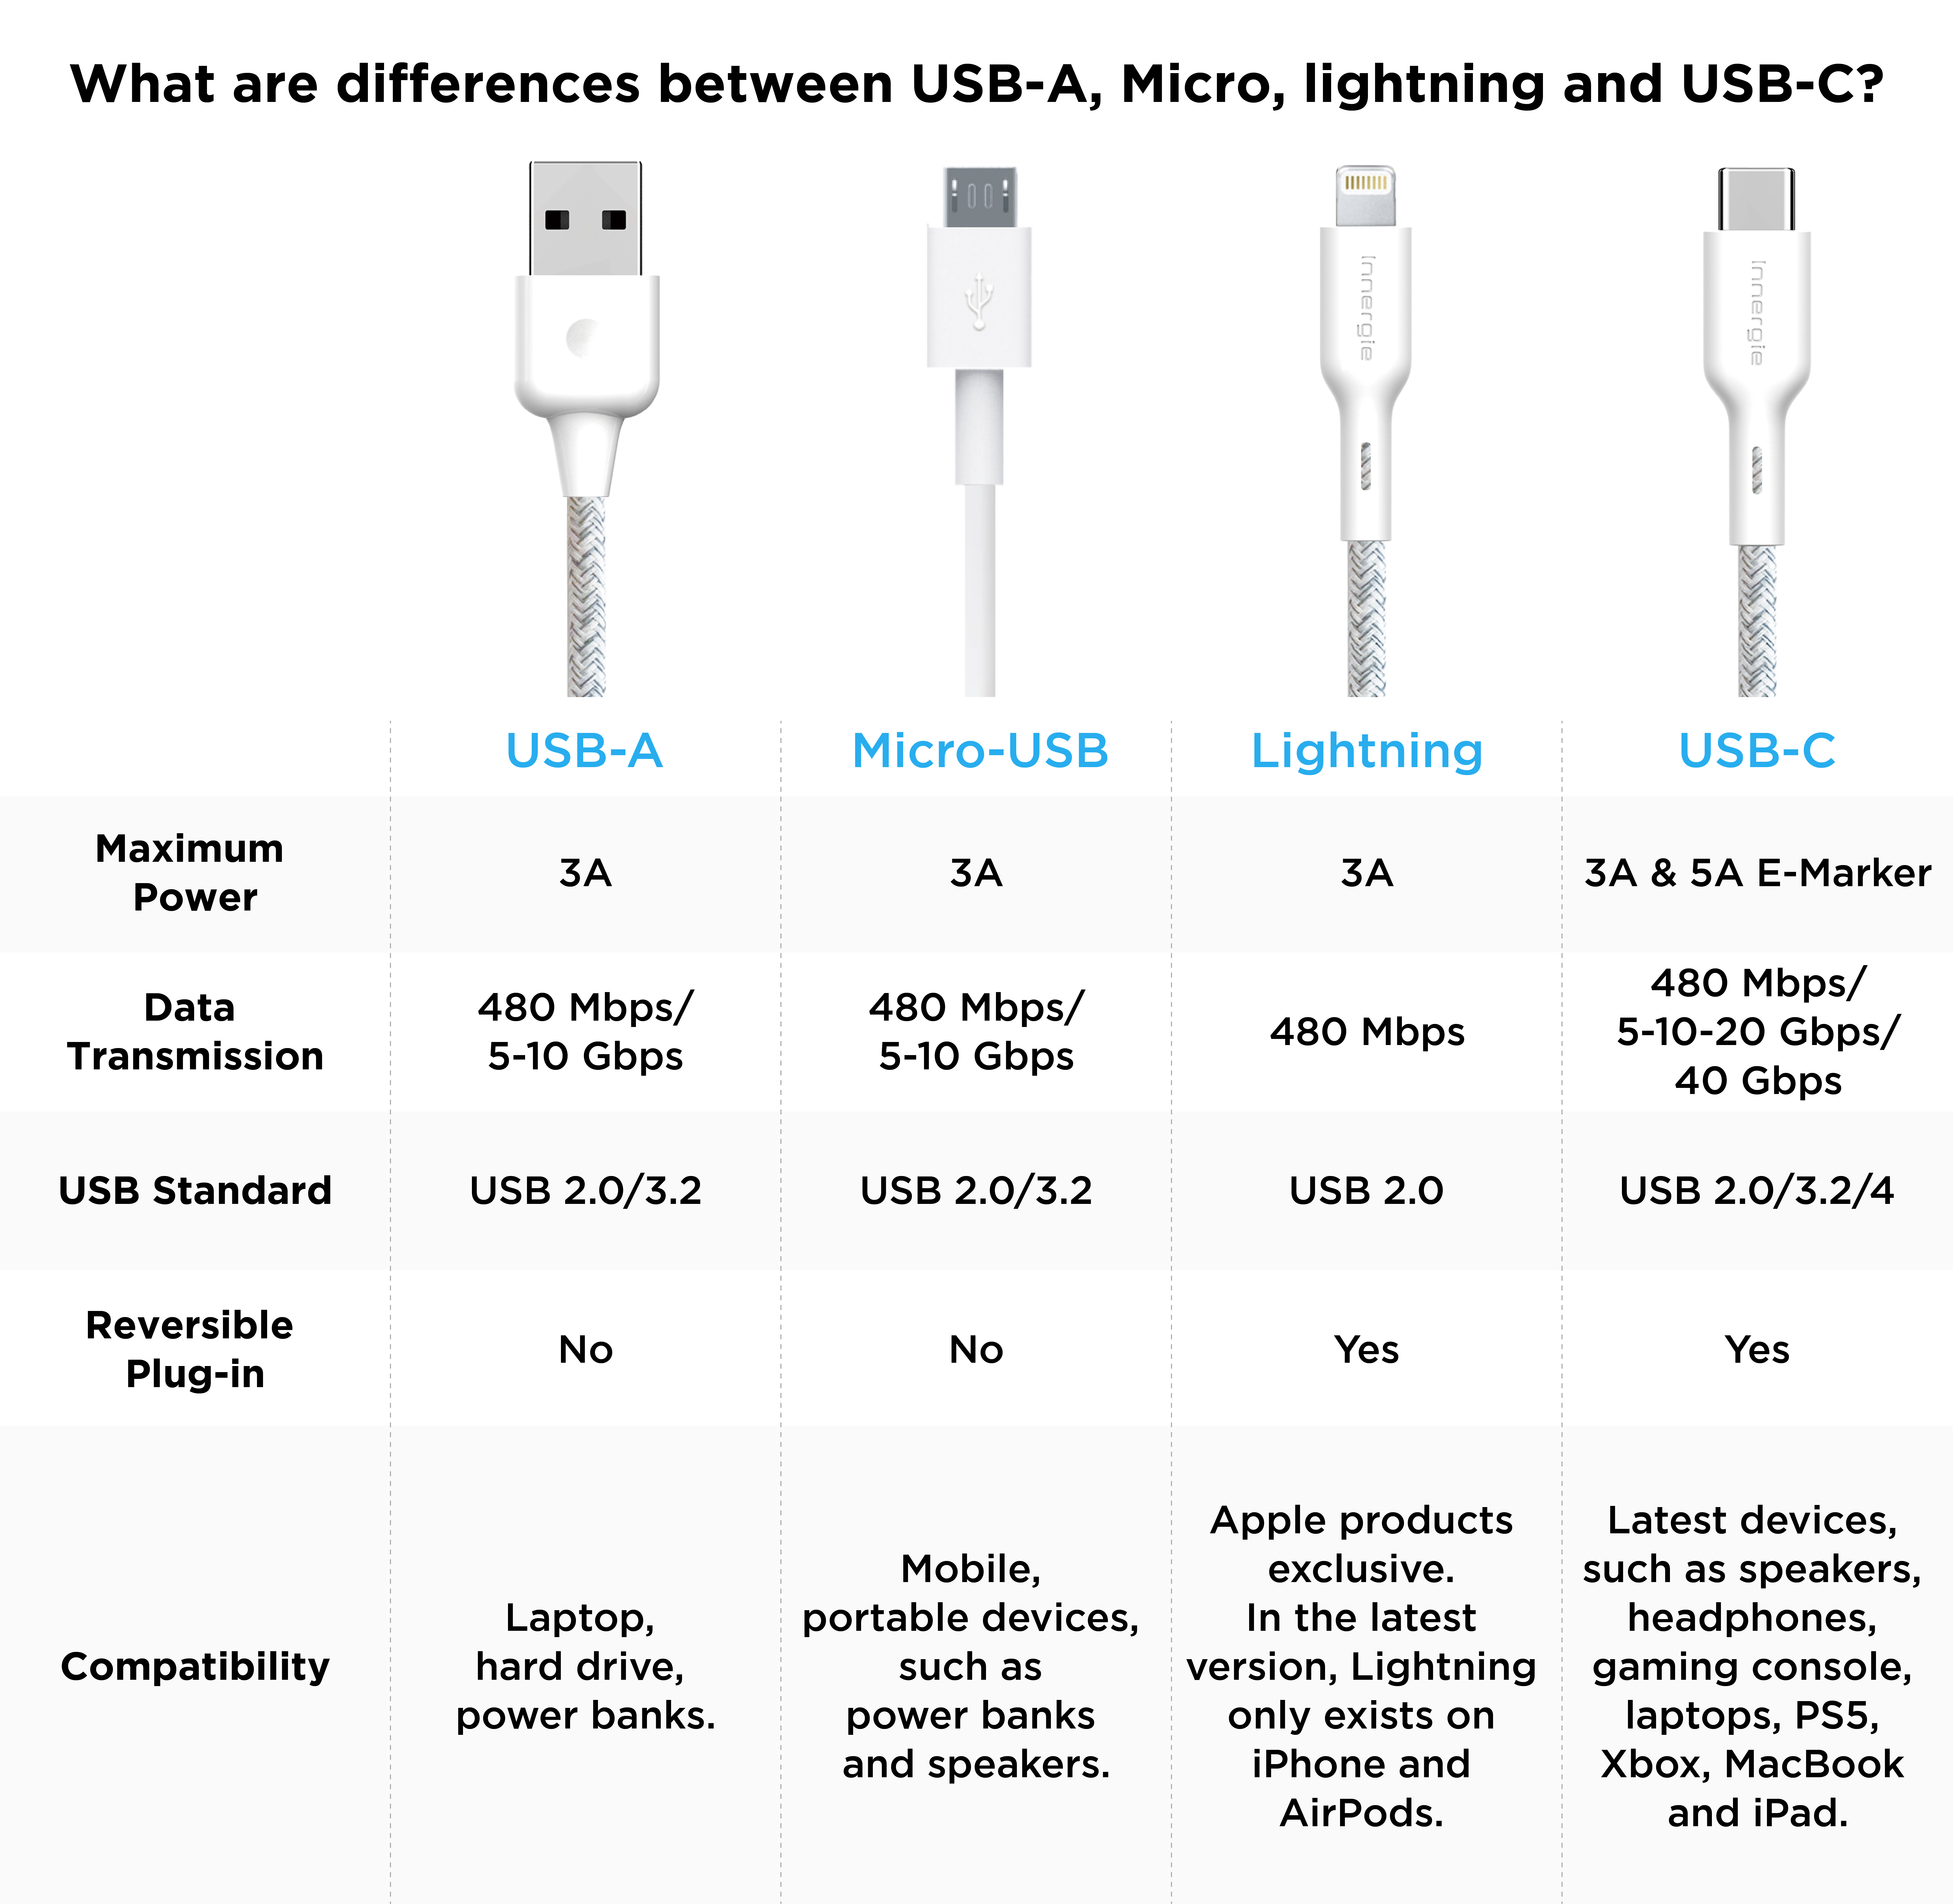 The between Micro-USB, Lightning and USB-C